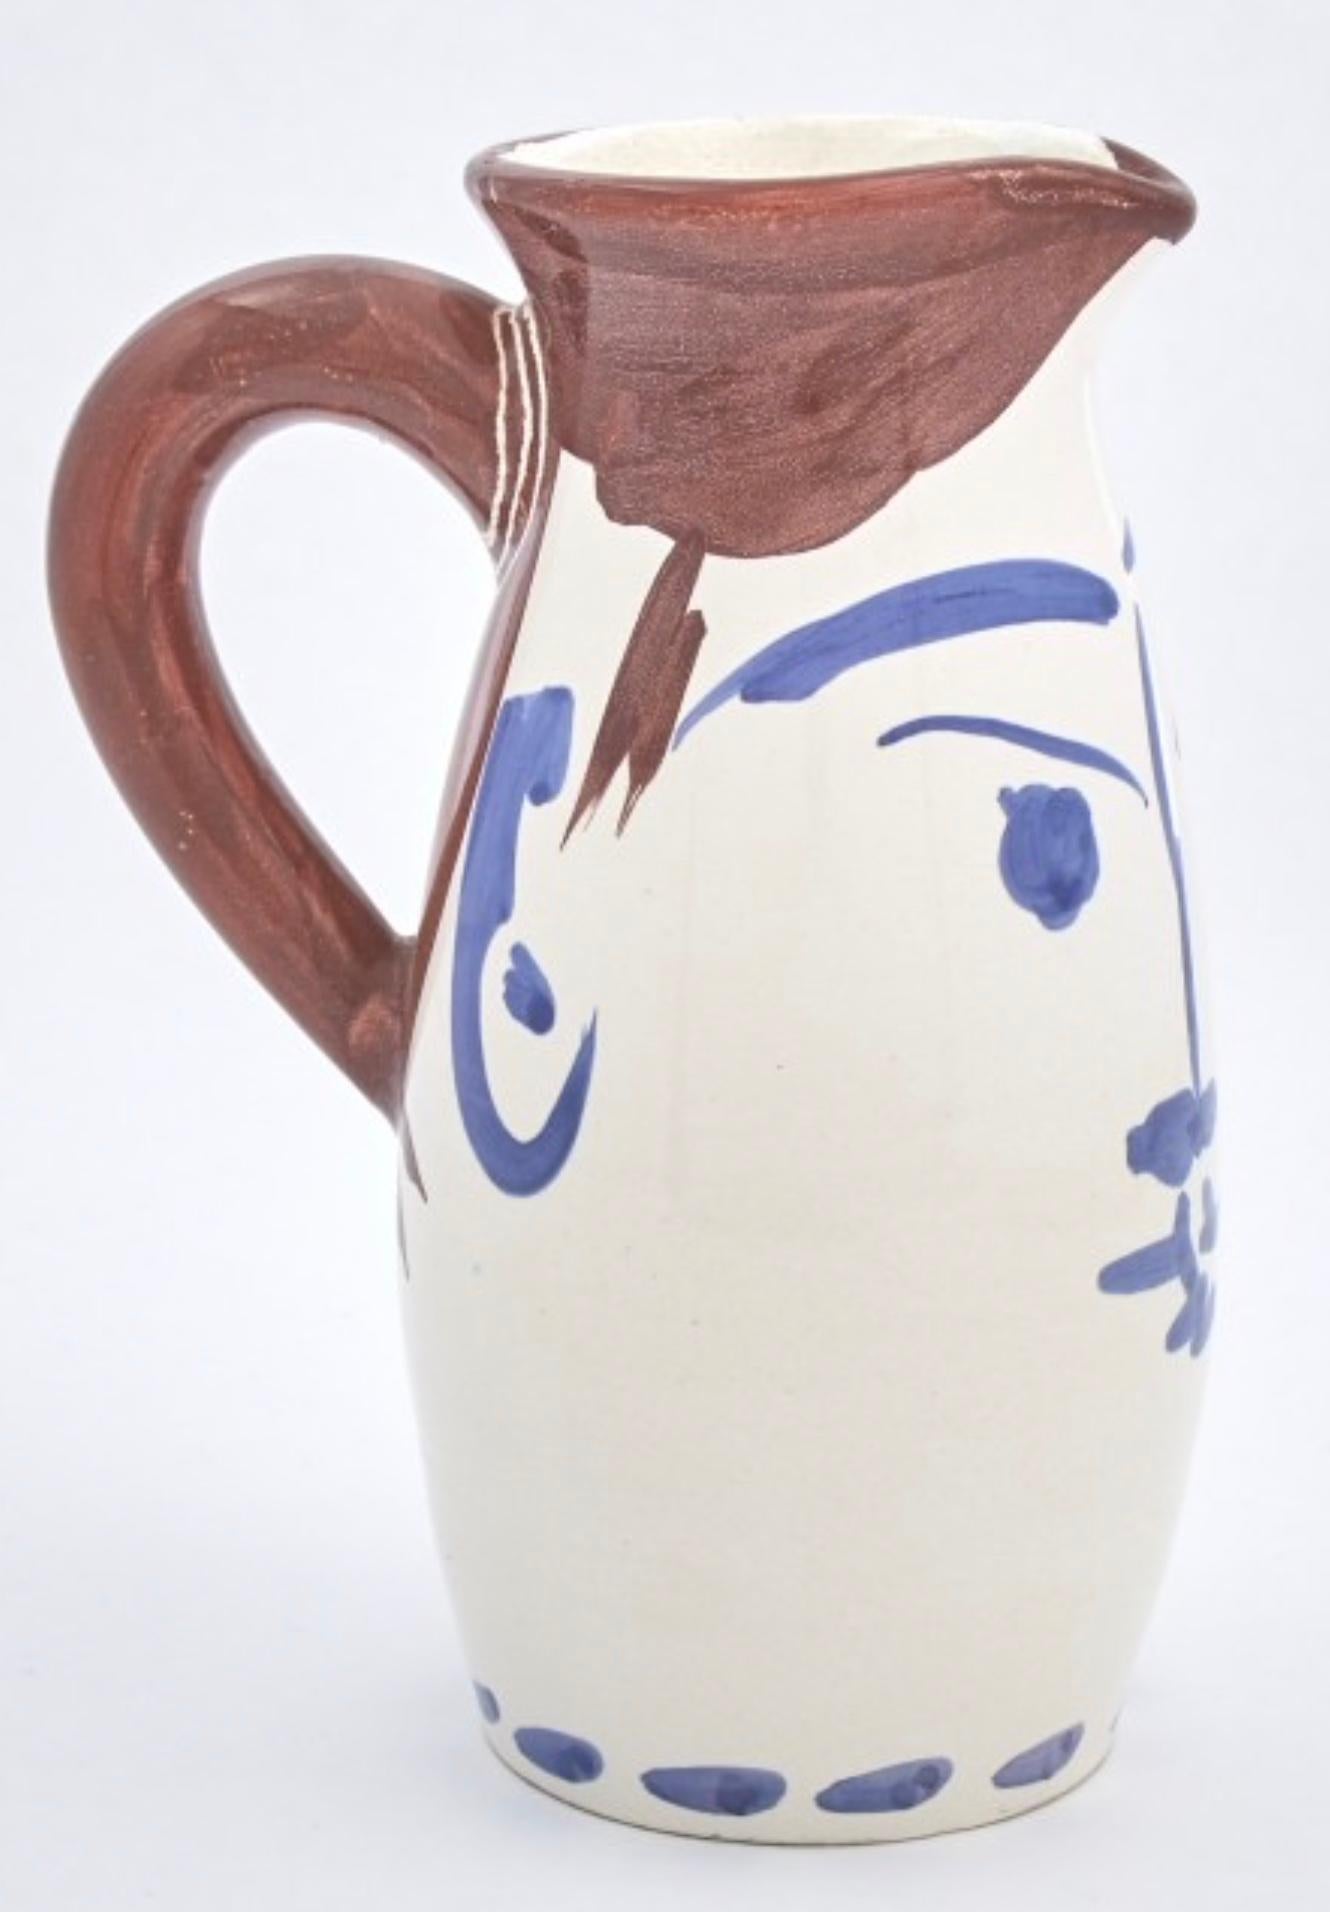 Chope Visage, Picasso, Pitcher, Edition, 1950's, Design, earthenware, Figurative

Chope Visage
Ed. 300 pcs
1959
Earthenware clay, decoration in engobes, glaze inside
H. 21.9 cm
Stamp indented and marked under the base : Madoura Plein Feu; Edition